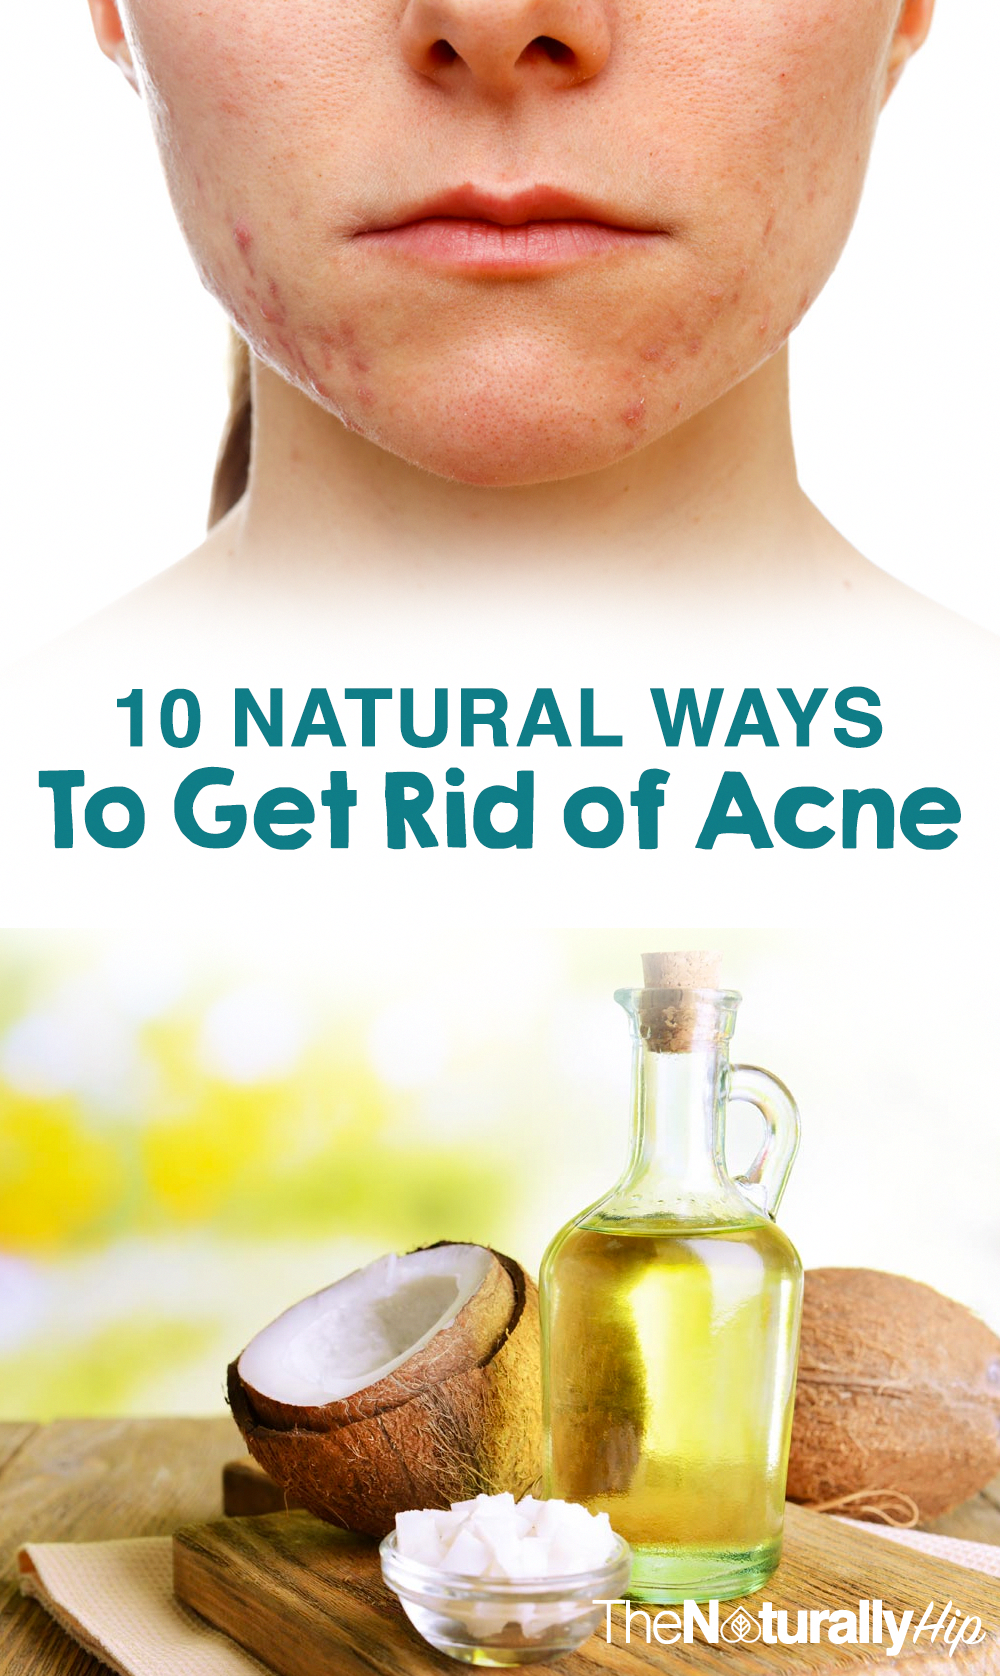 10 Natural Ways to Get Rid of Acne Fast